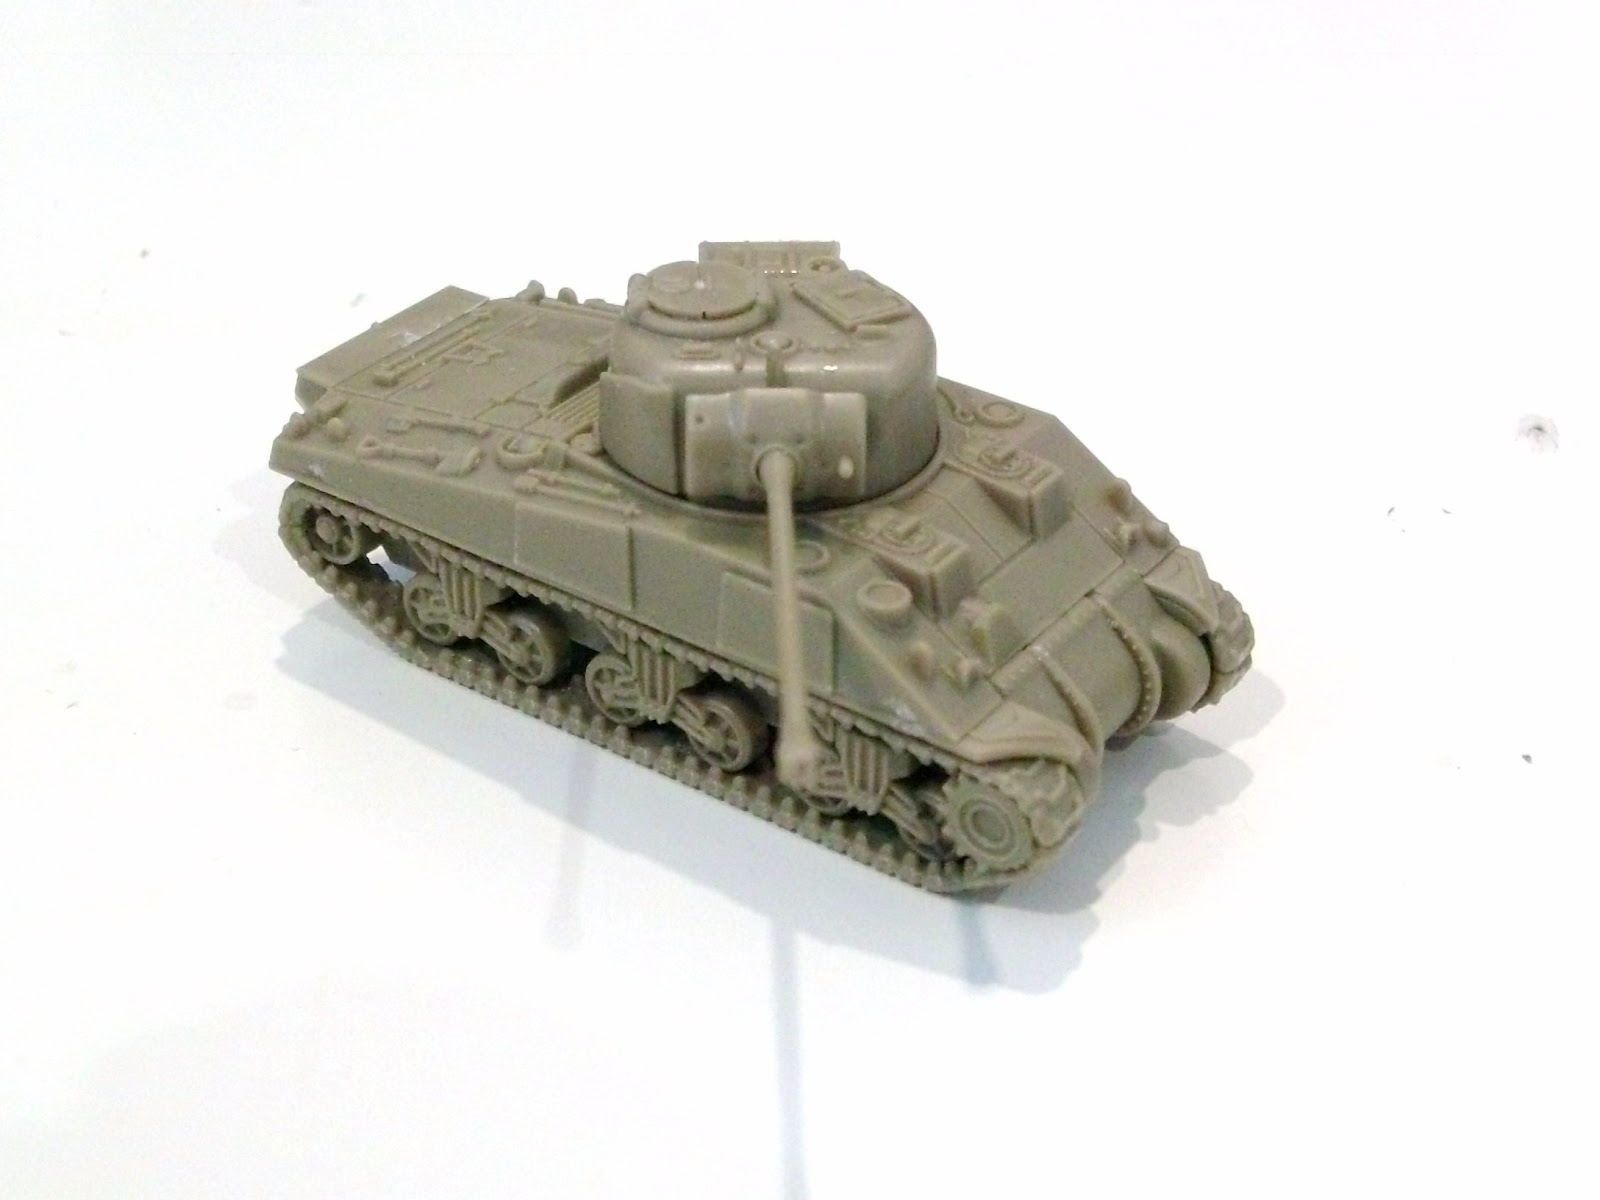 Breakthrough Assault: Review - Plastic Soldier Company Sherman M4A4/Firefly